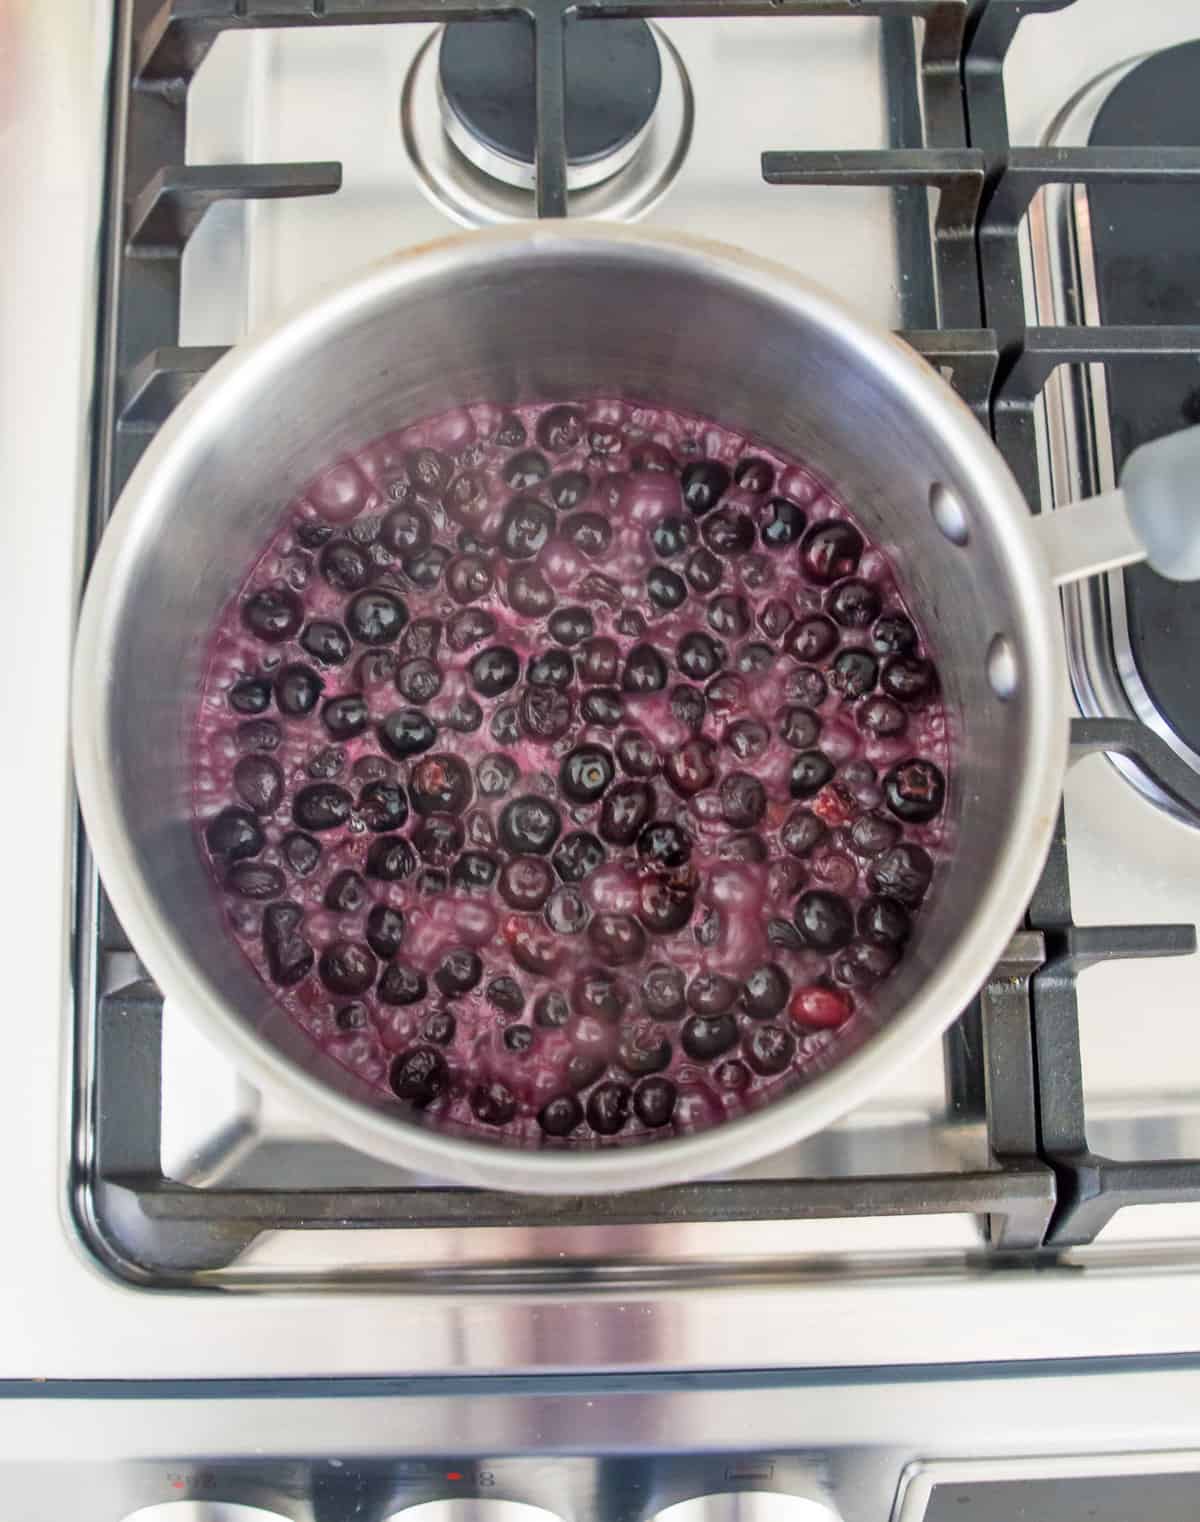 Blueberries and coconut milk boiling in a pot on the stovetop.